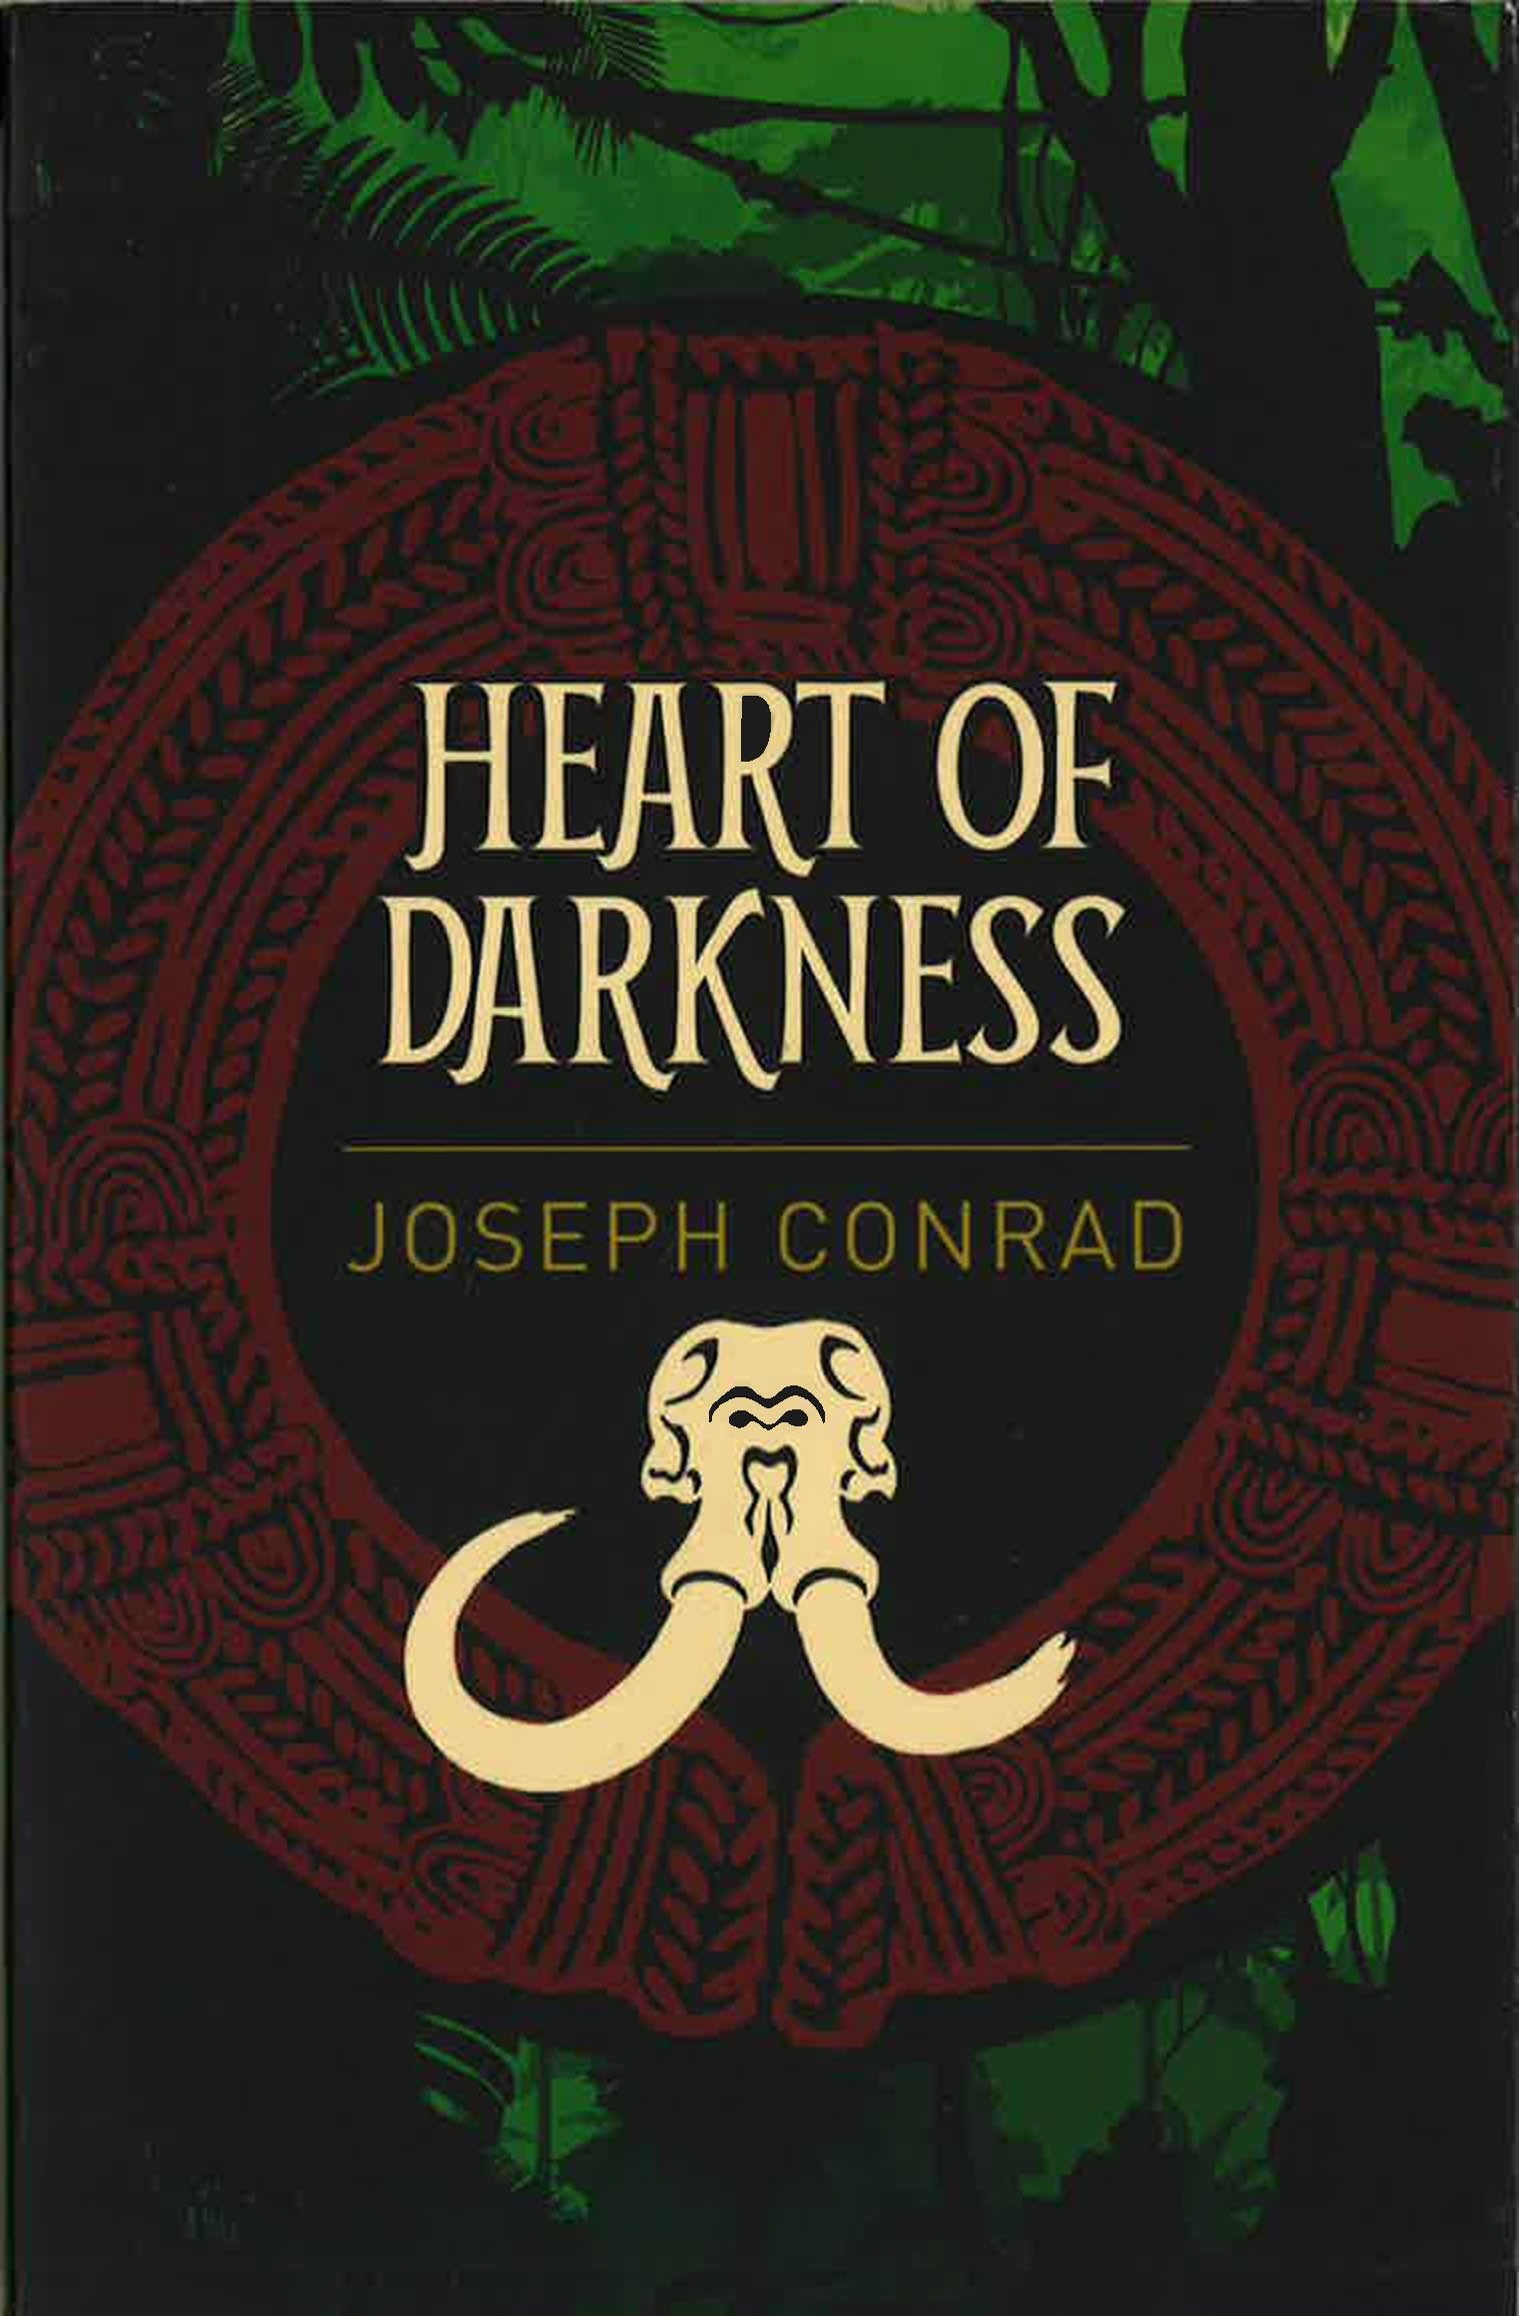 book review of heart of darkness